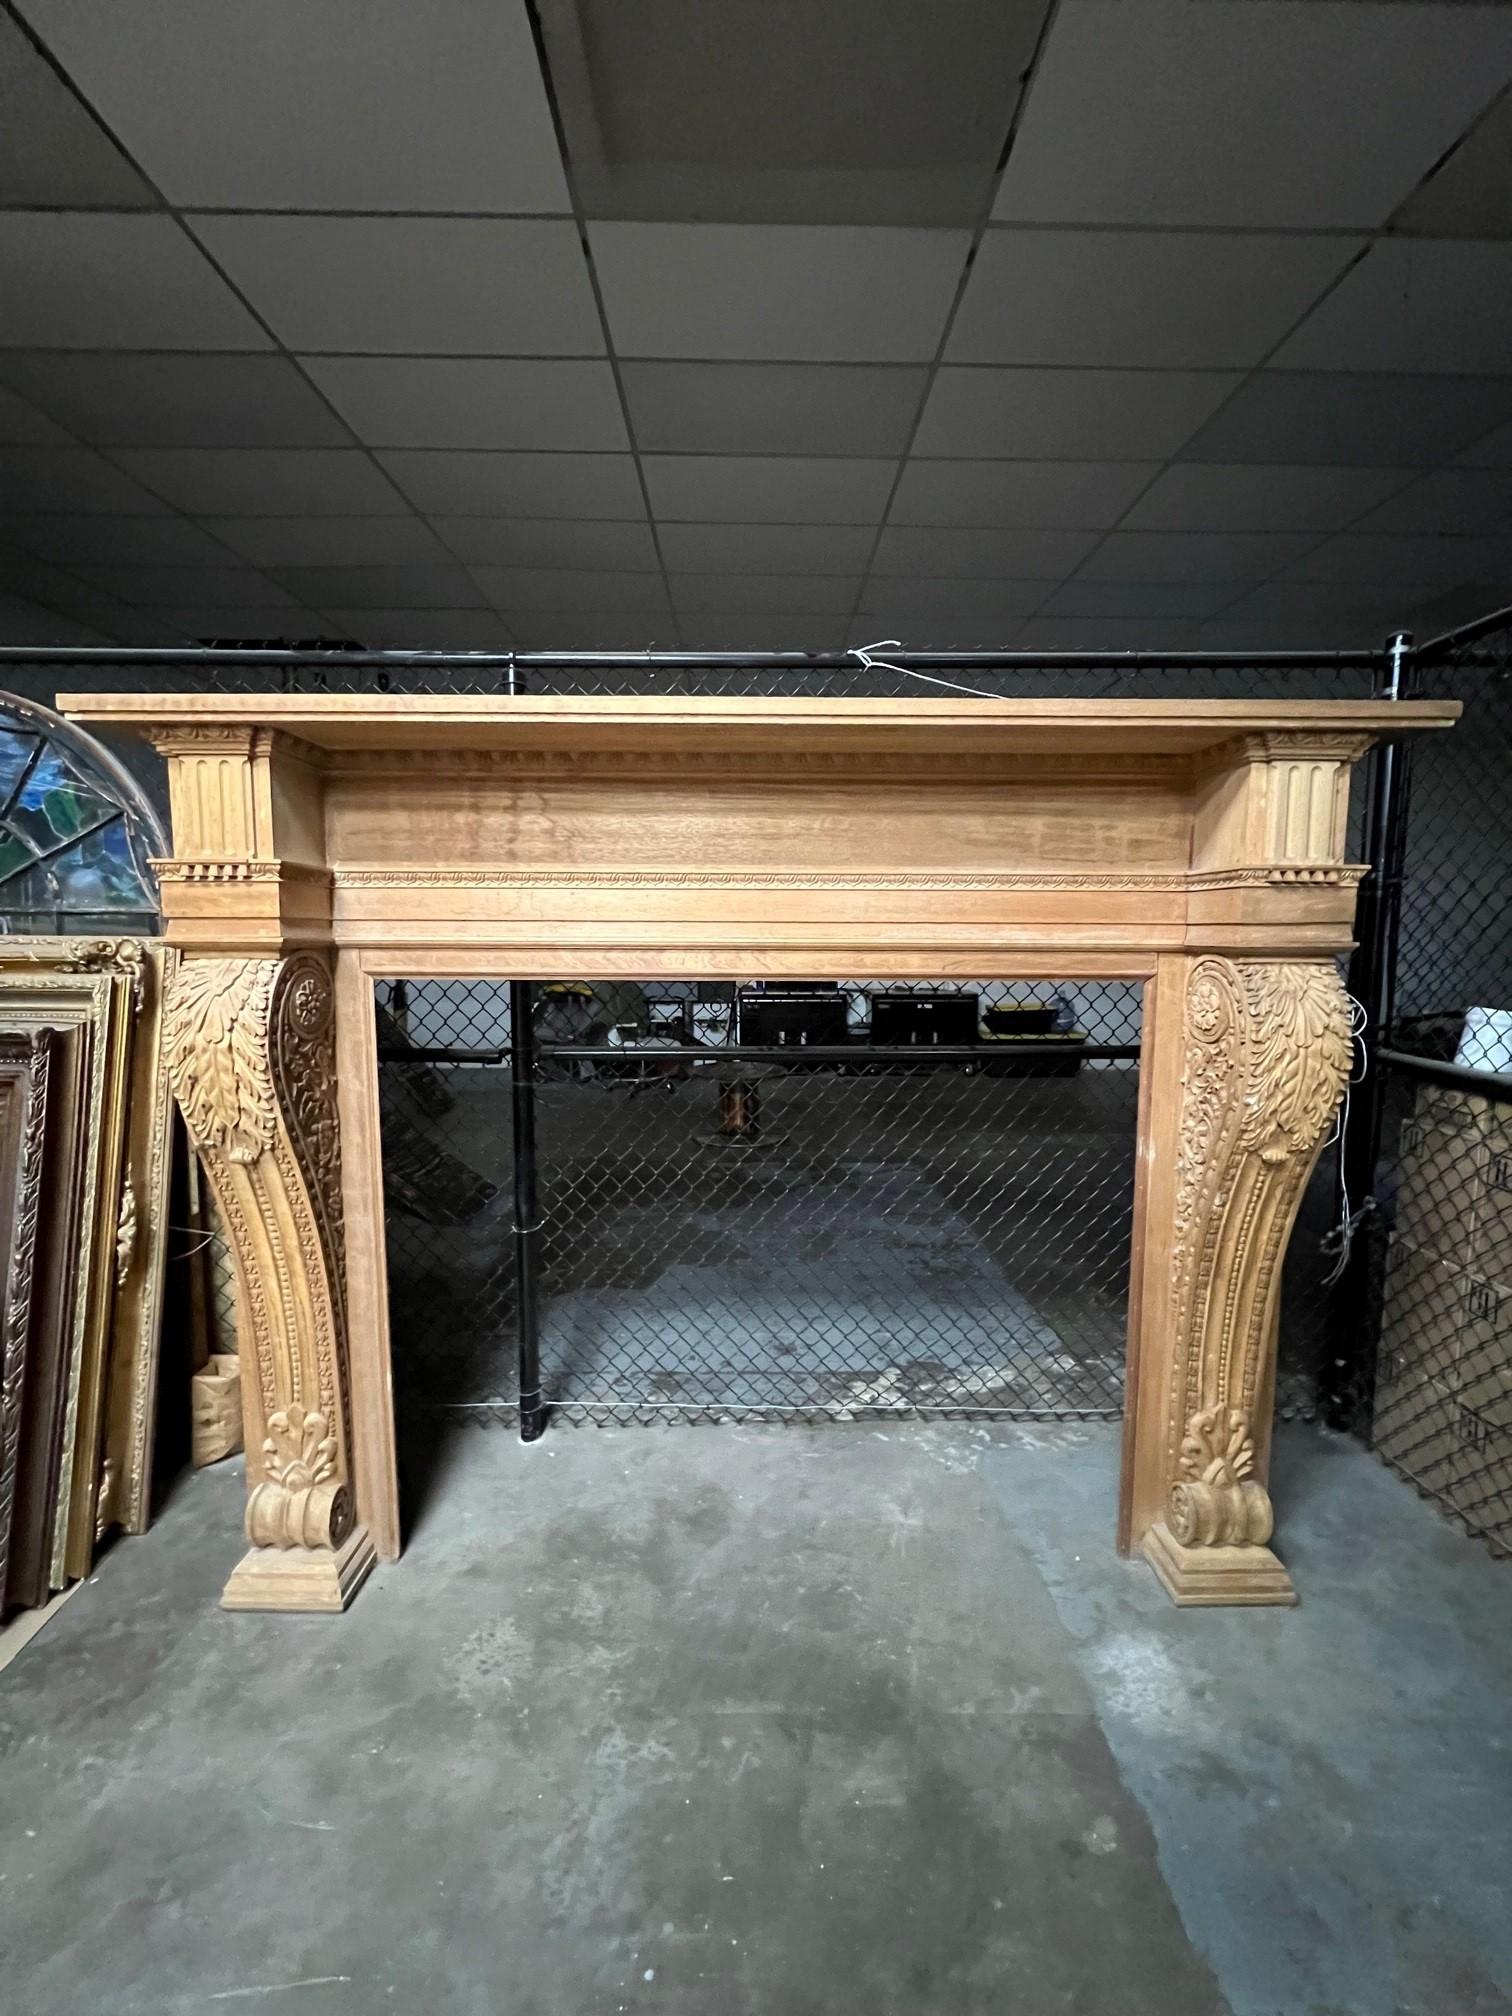 Massive carved wood fireplace mantel with large carved acanthus leaf corbels on each leg. This is a great oversize fireplace mantel that was reproduced from an original mantel dating back to the late 1800s. The mantel has never been installed and is